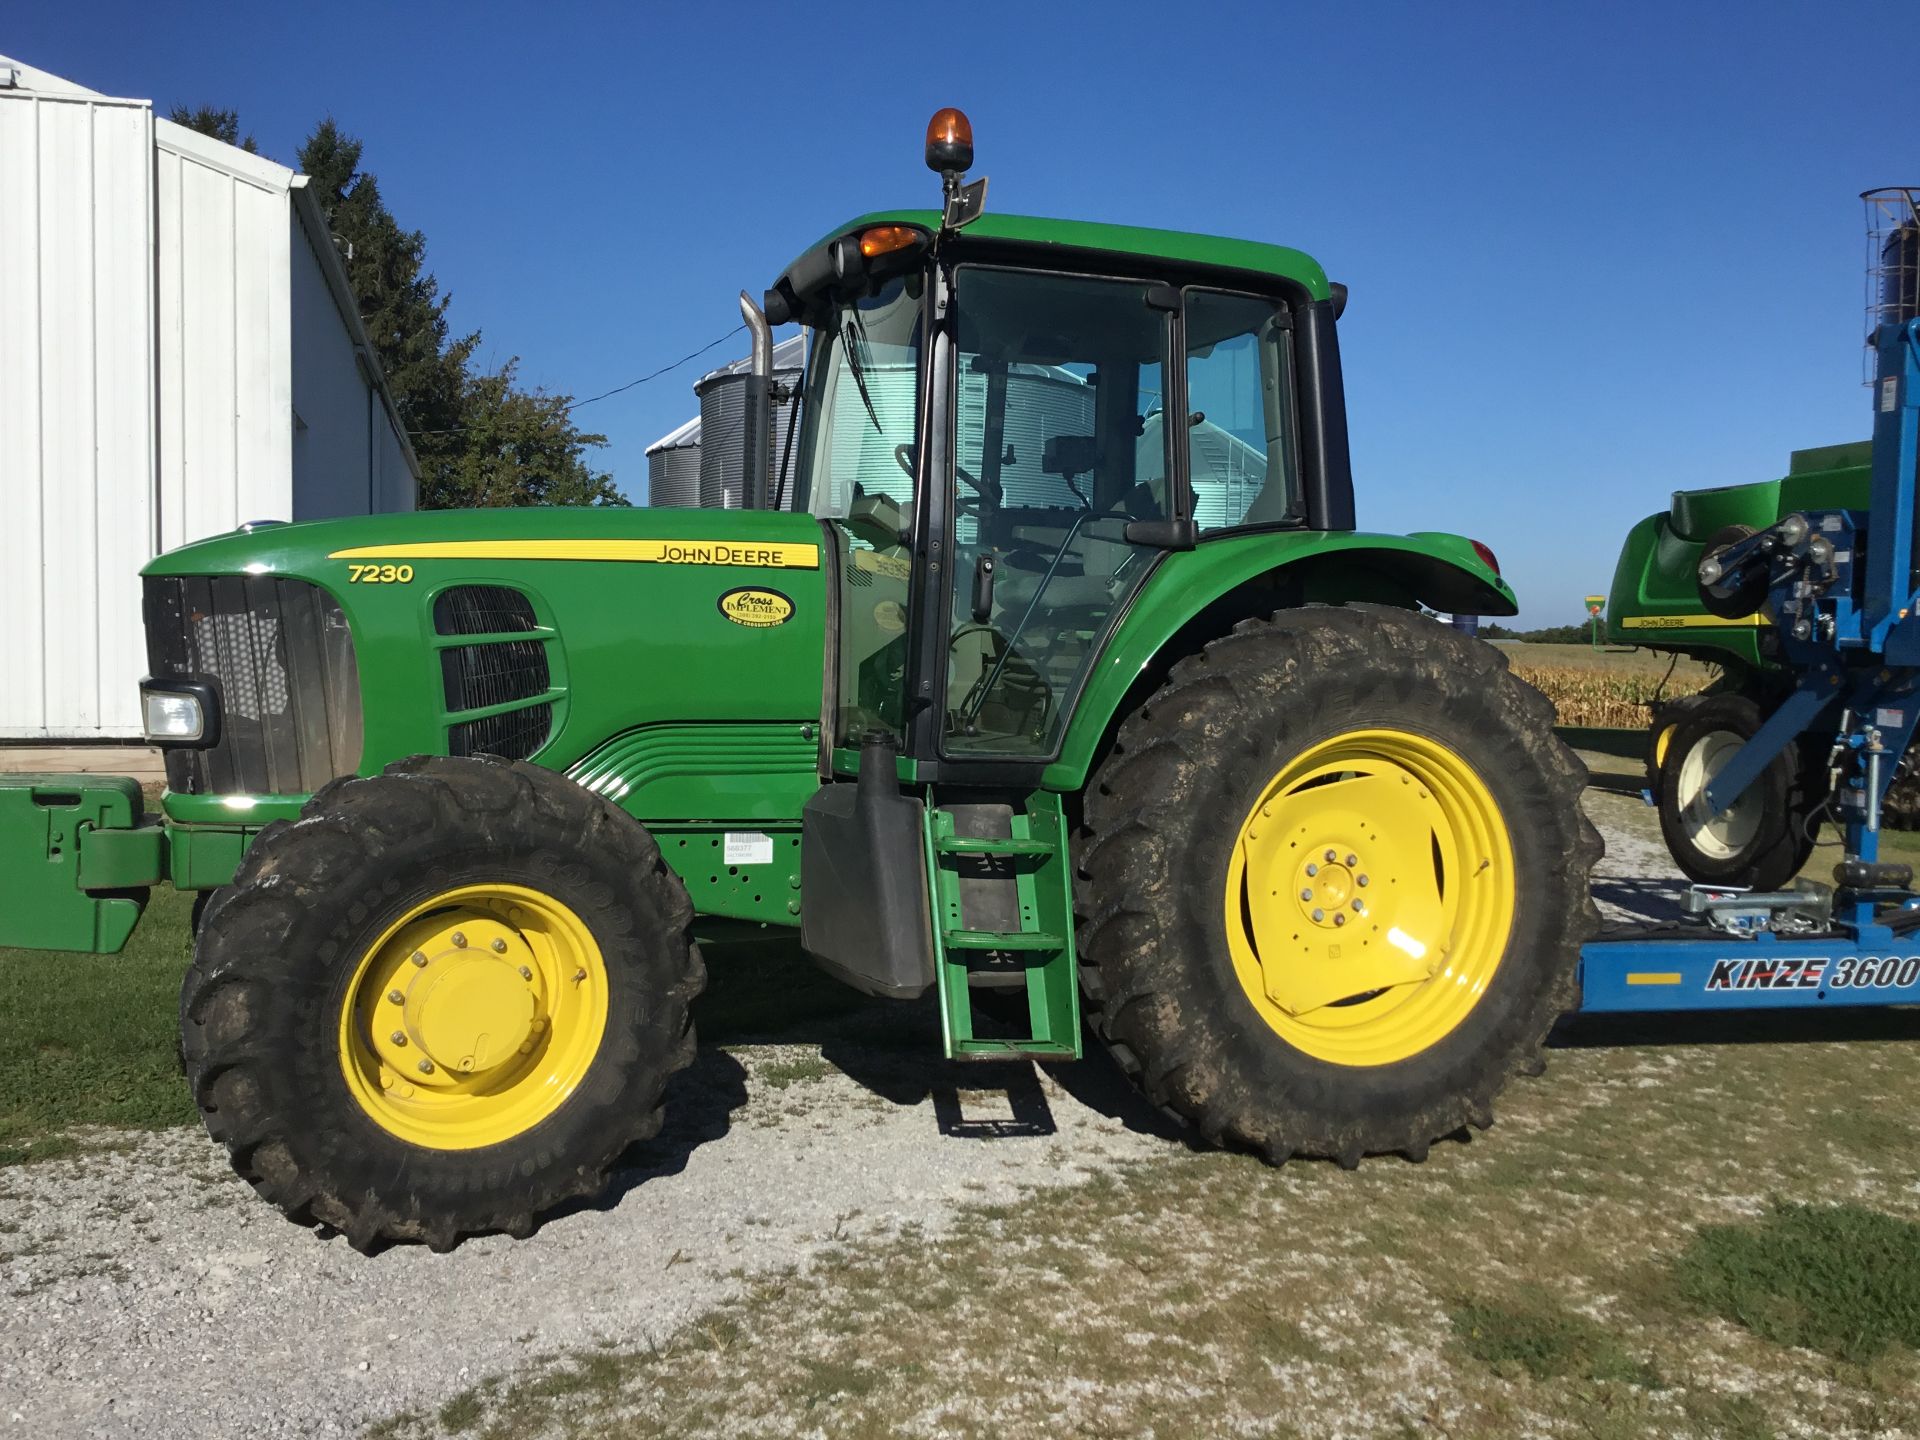 2009 JD 7230 MFWD, 24 Speed Trans, 3 Hyd. Remotes, 1000 PTO, 8 Front Wts., 460/85R38 Rear Tires,